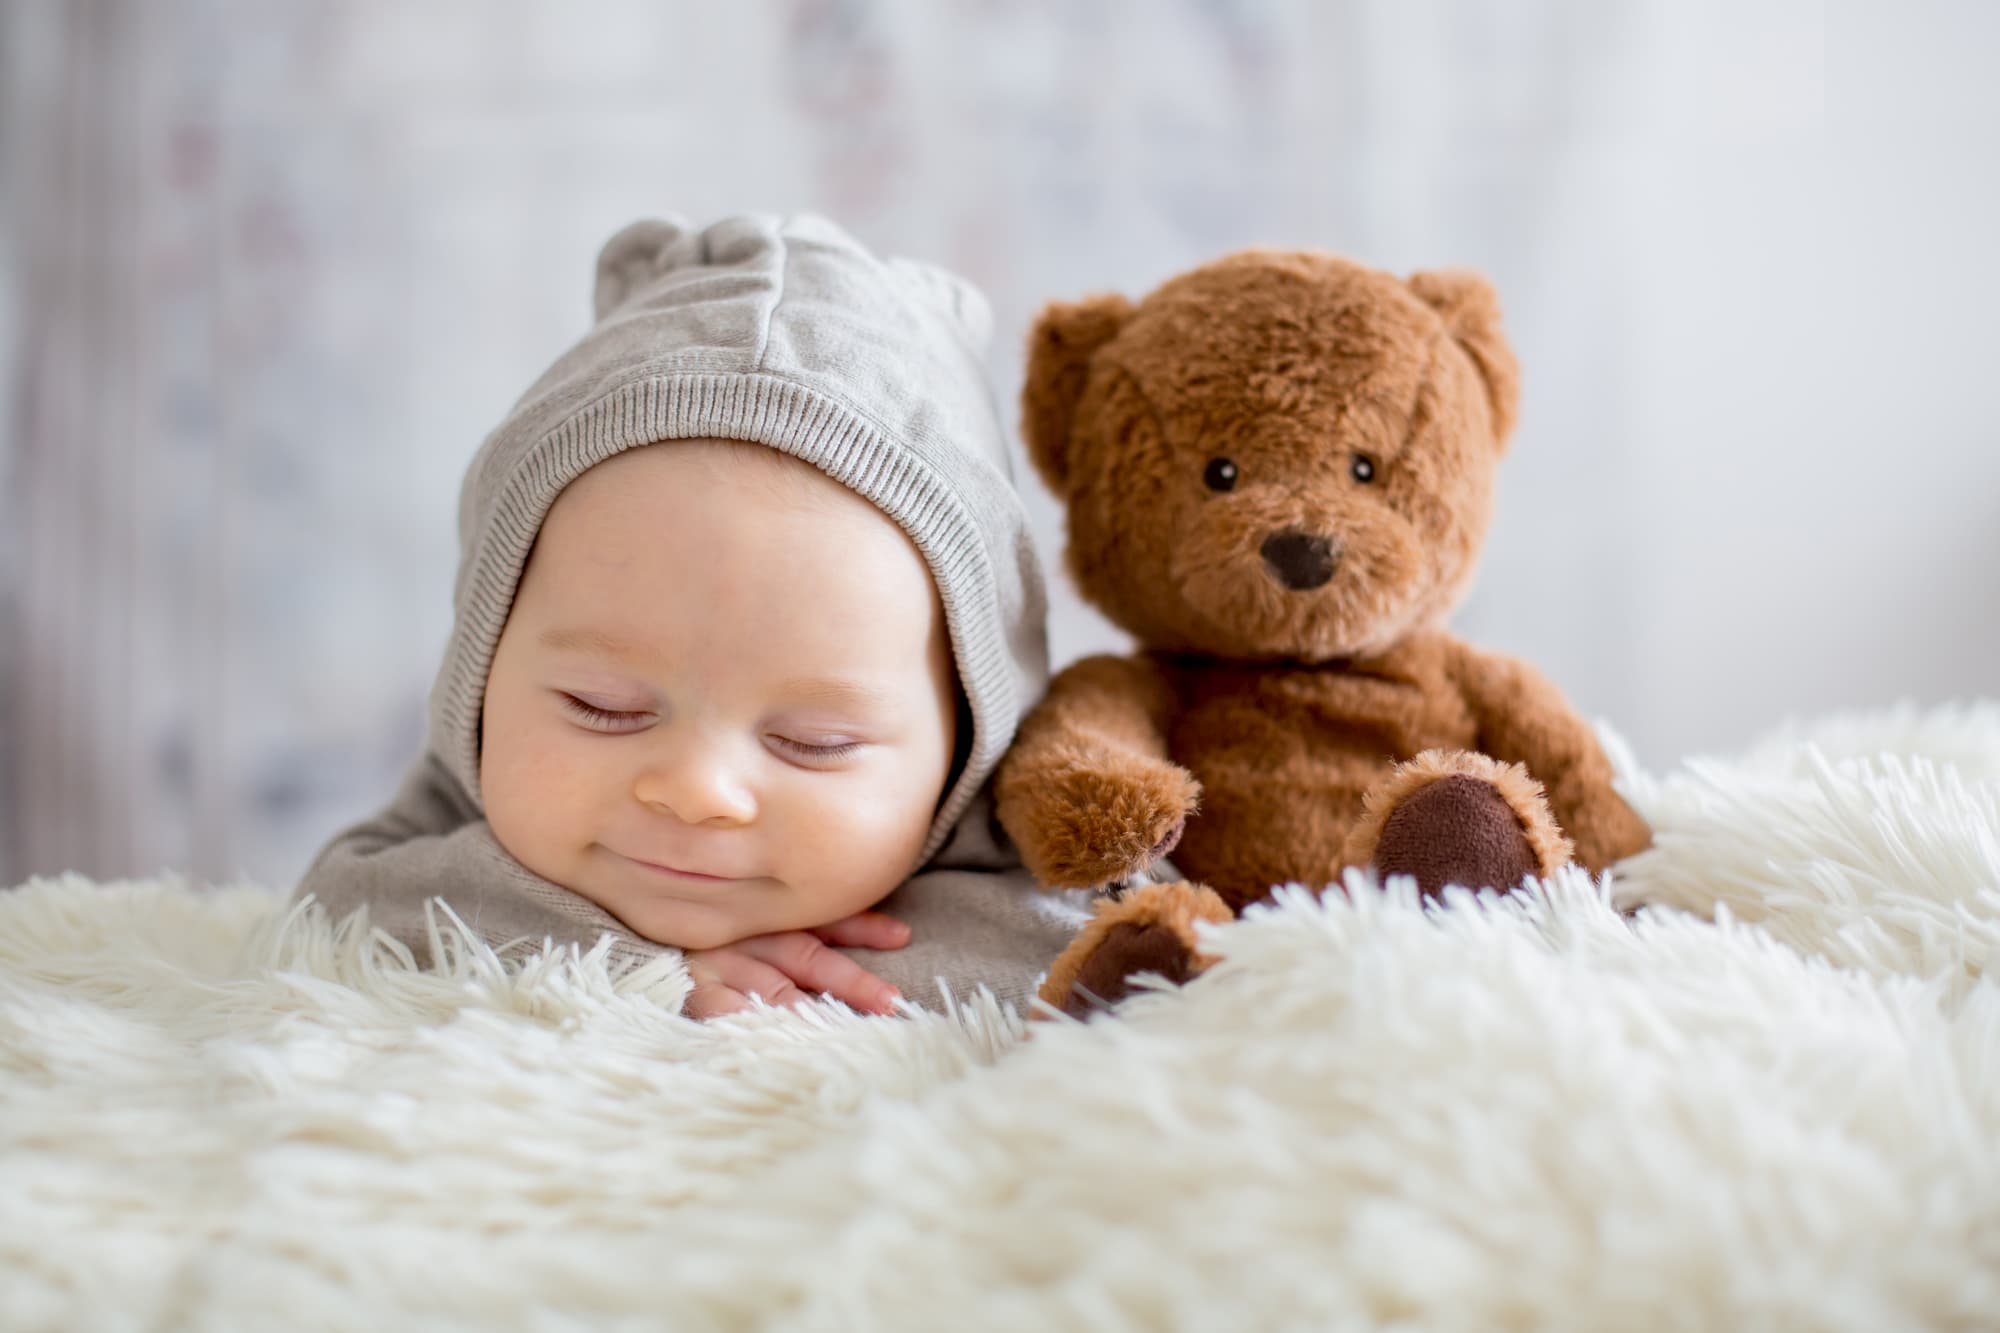 A smiling baby lying on a rug with their cuddly toy